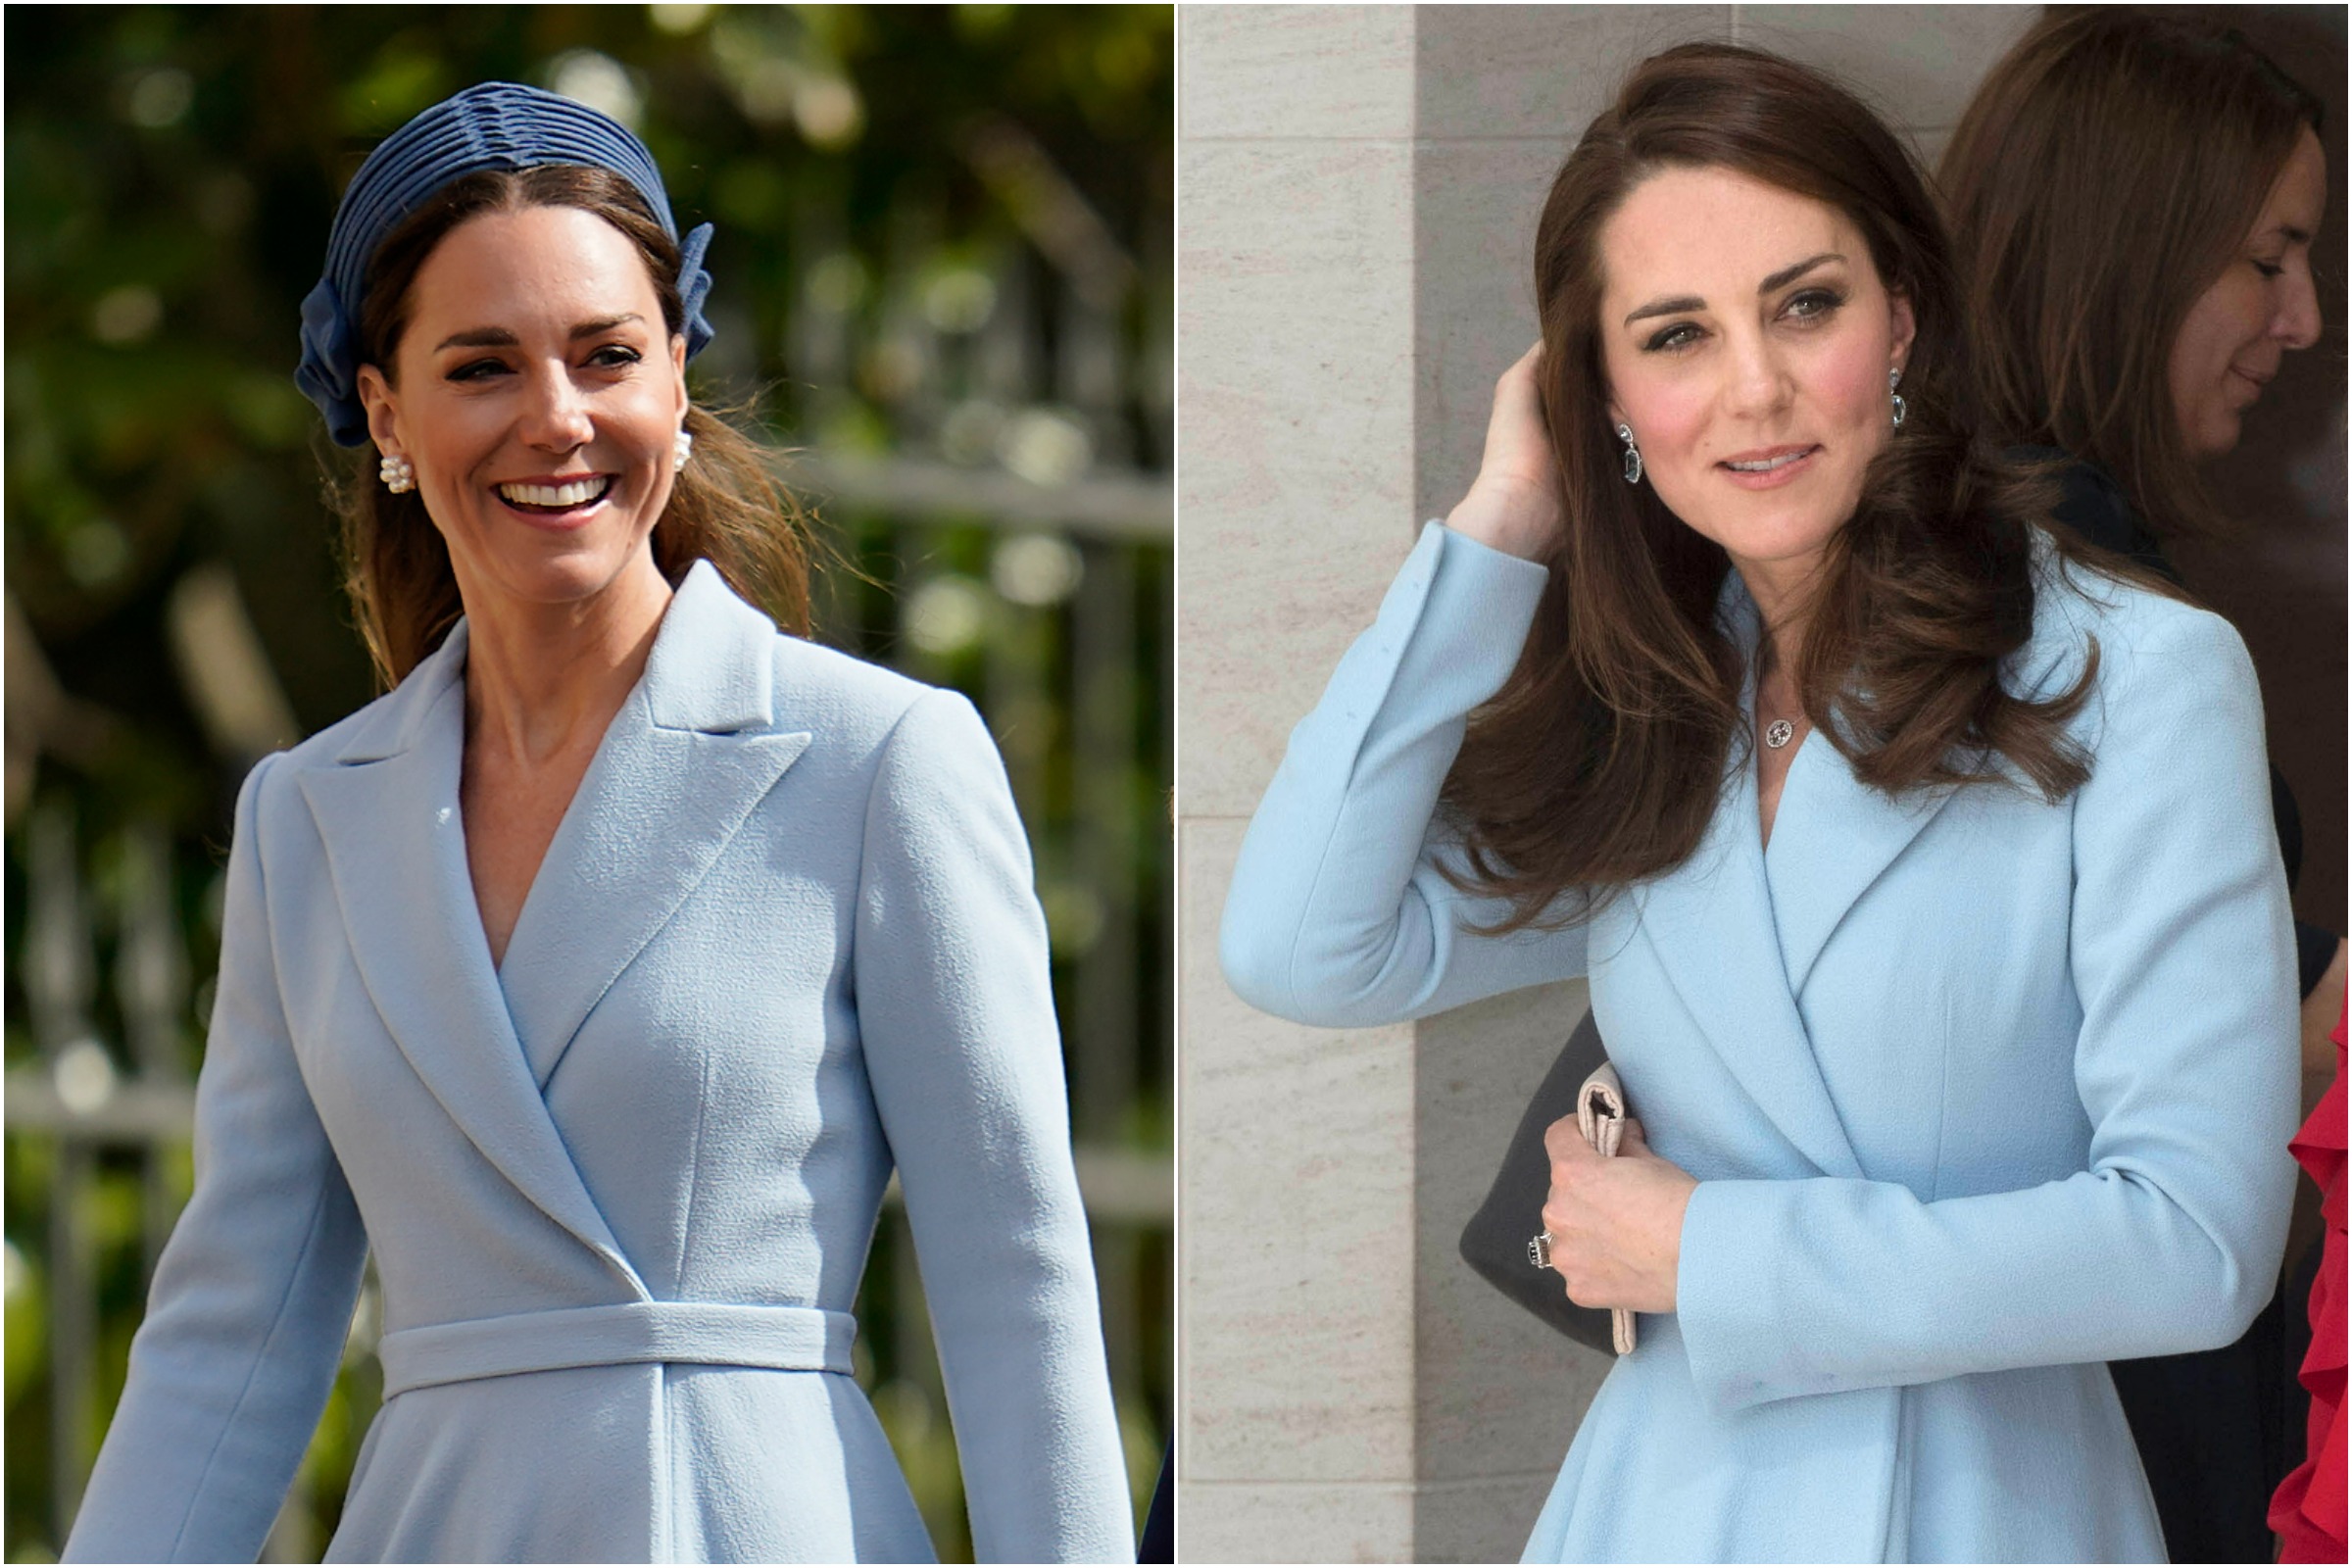 Kate Middleton Upholds Easter Tradition of Rewearing Past Outfits to Church